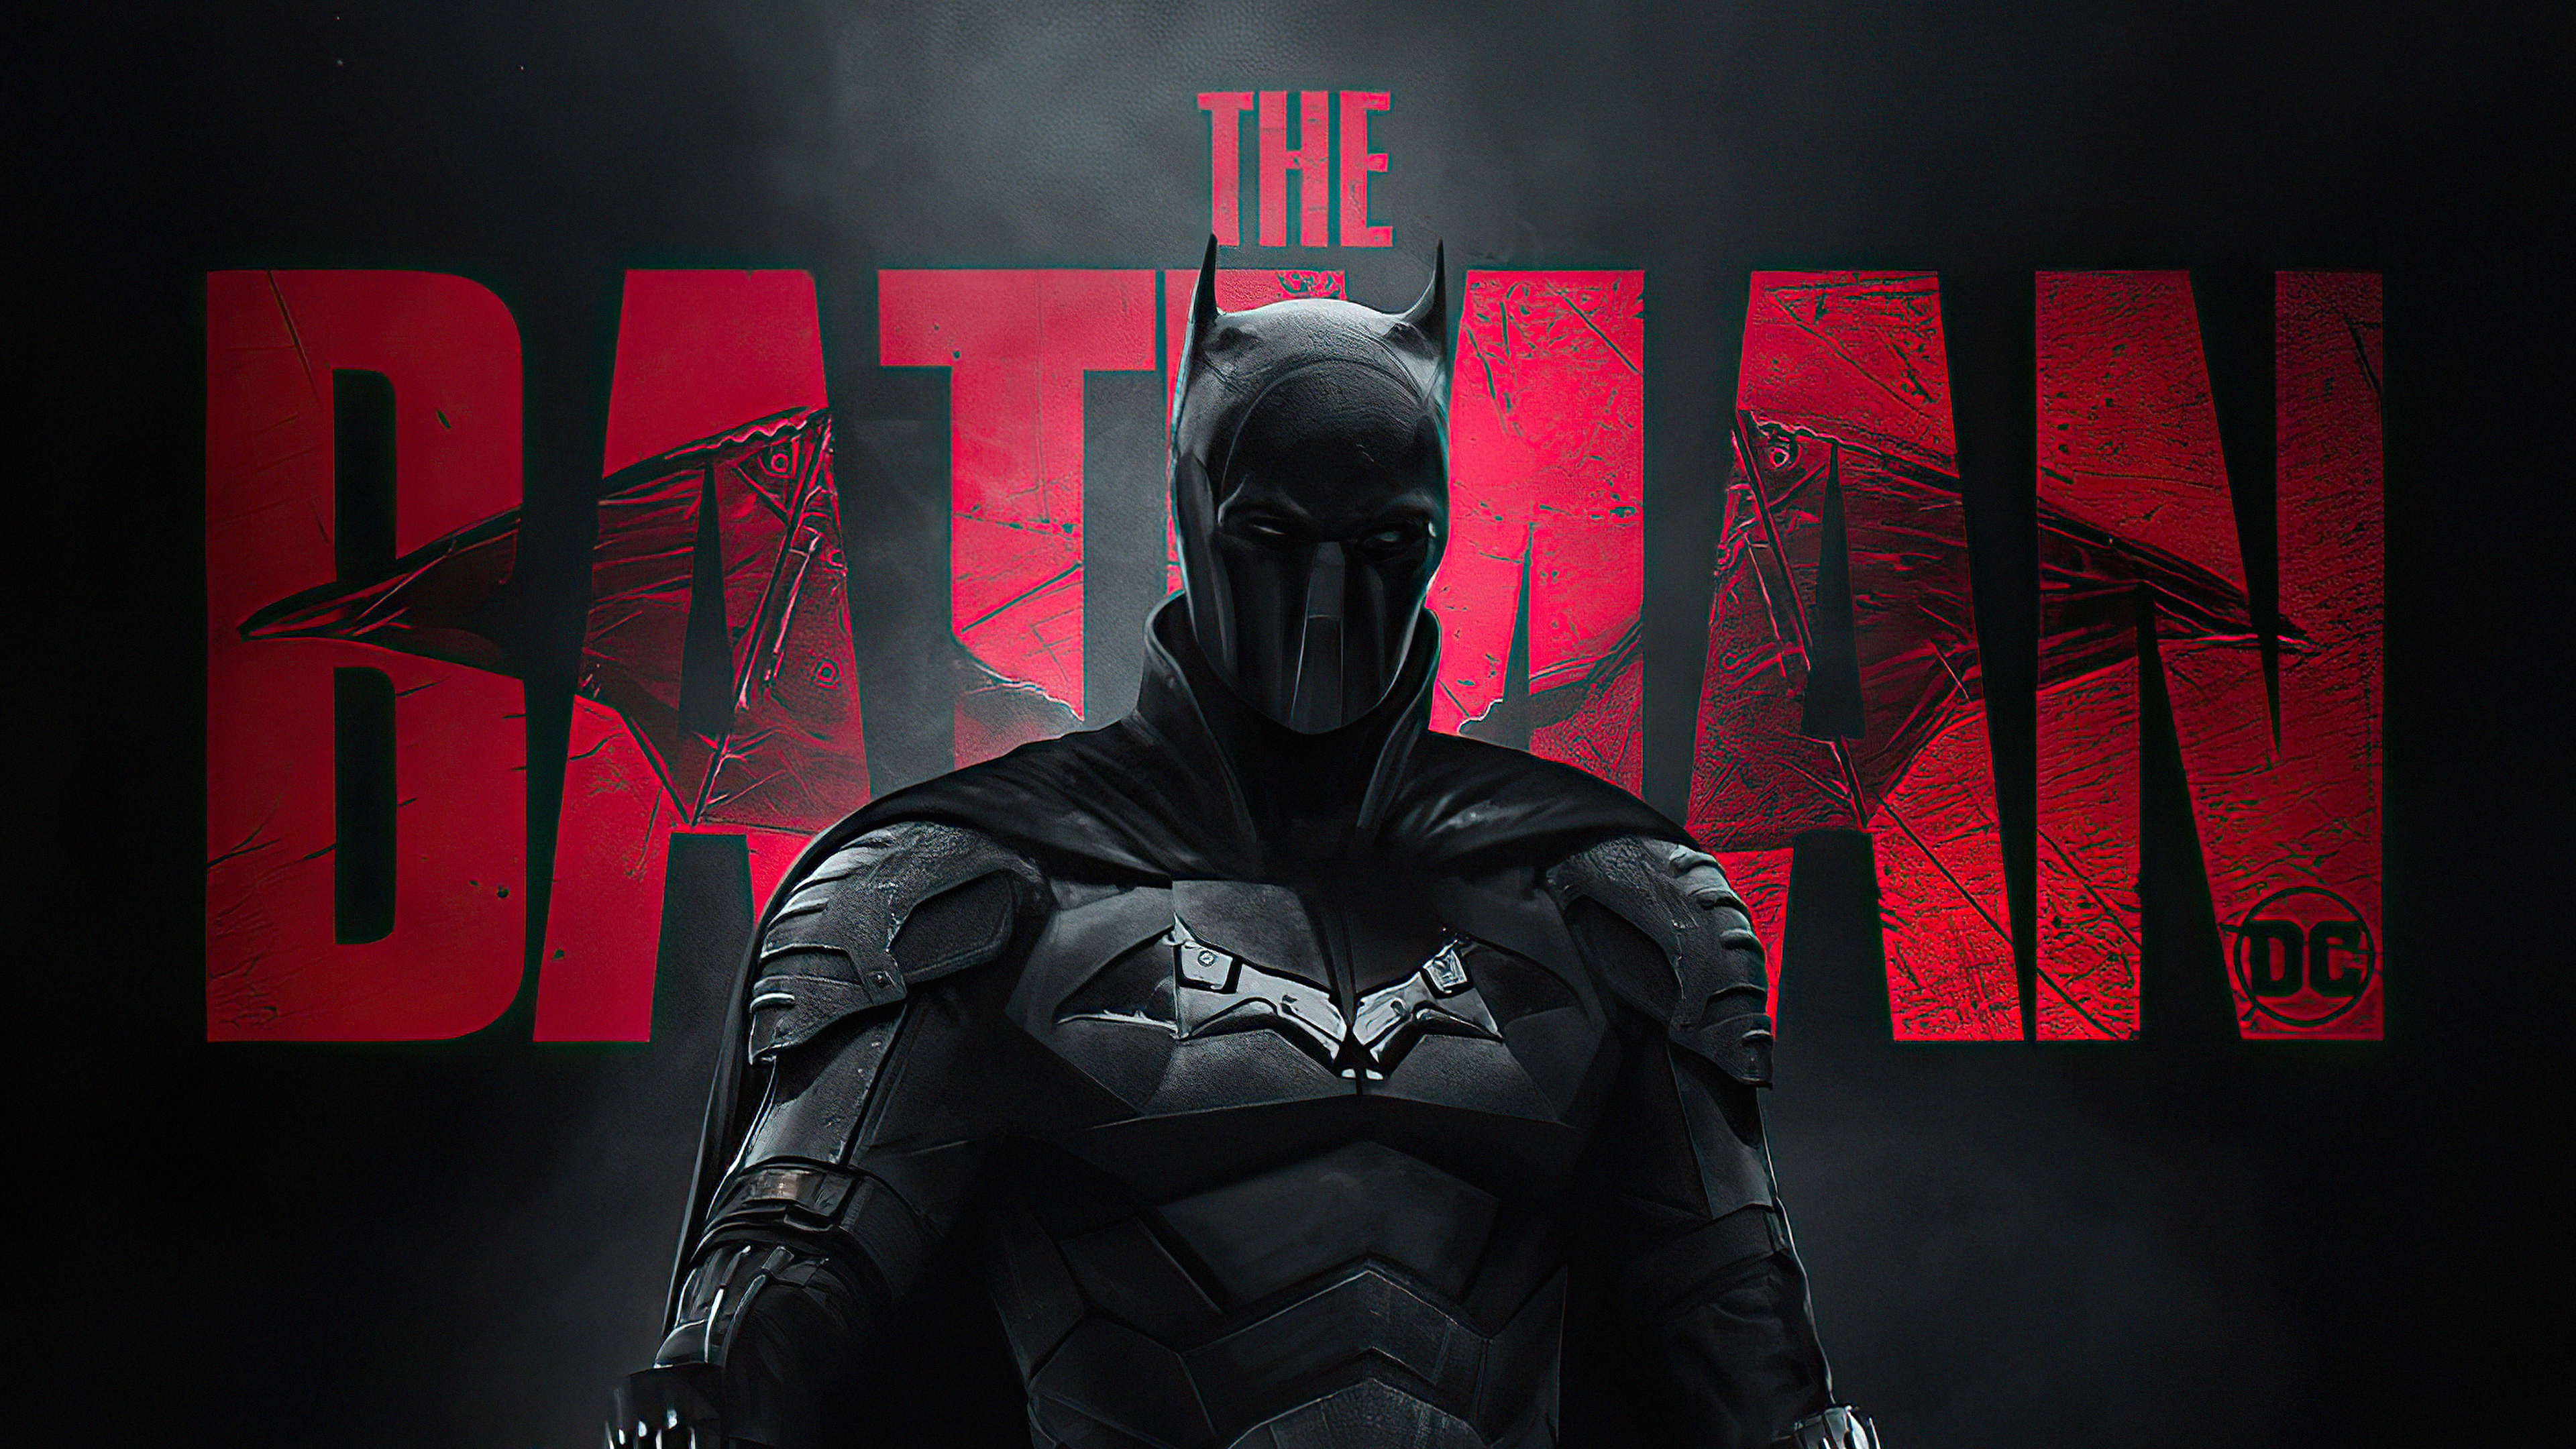 3840x2160 140+ The Batman HD Wallpapers and Backgrounds